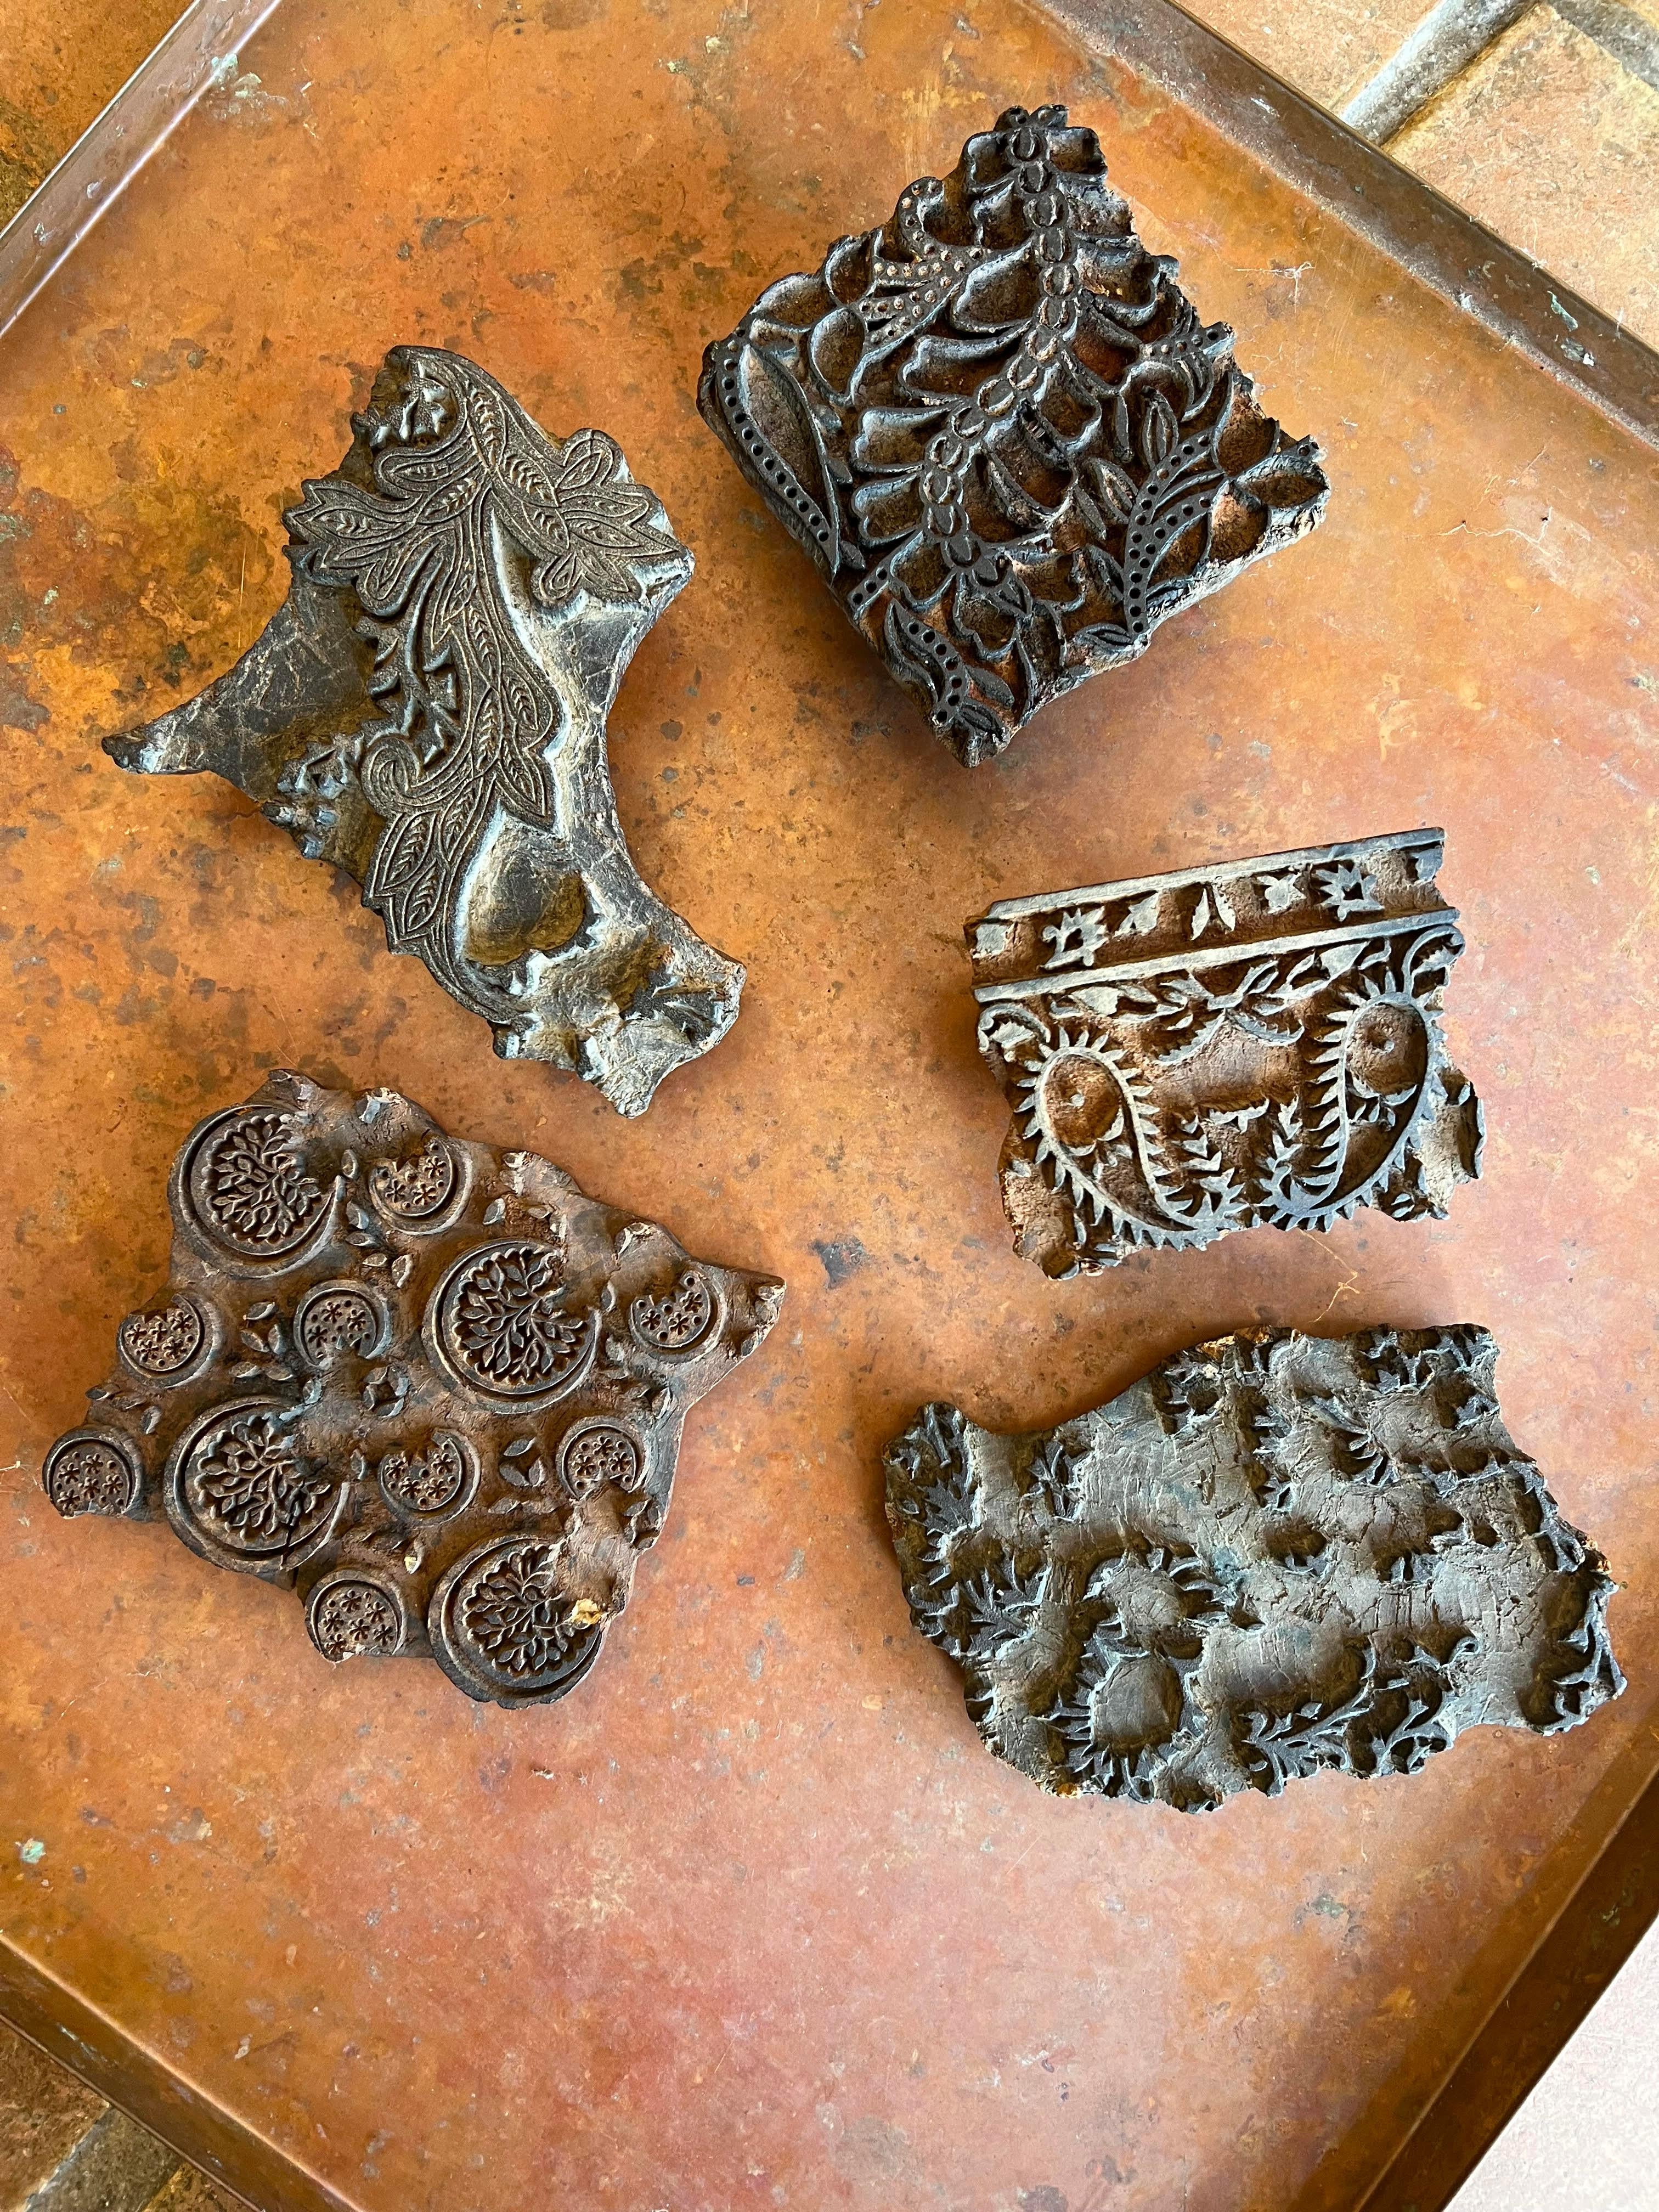 Set of Antique Wooden Printing Textile Blocks. The largest size is the dimensions listed. Varying sizes and depths. Looks great on a wall as a set. The price is for the set of 5.